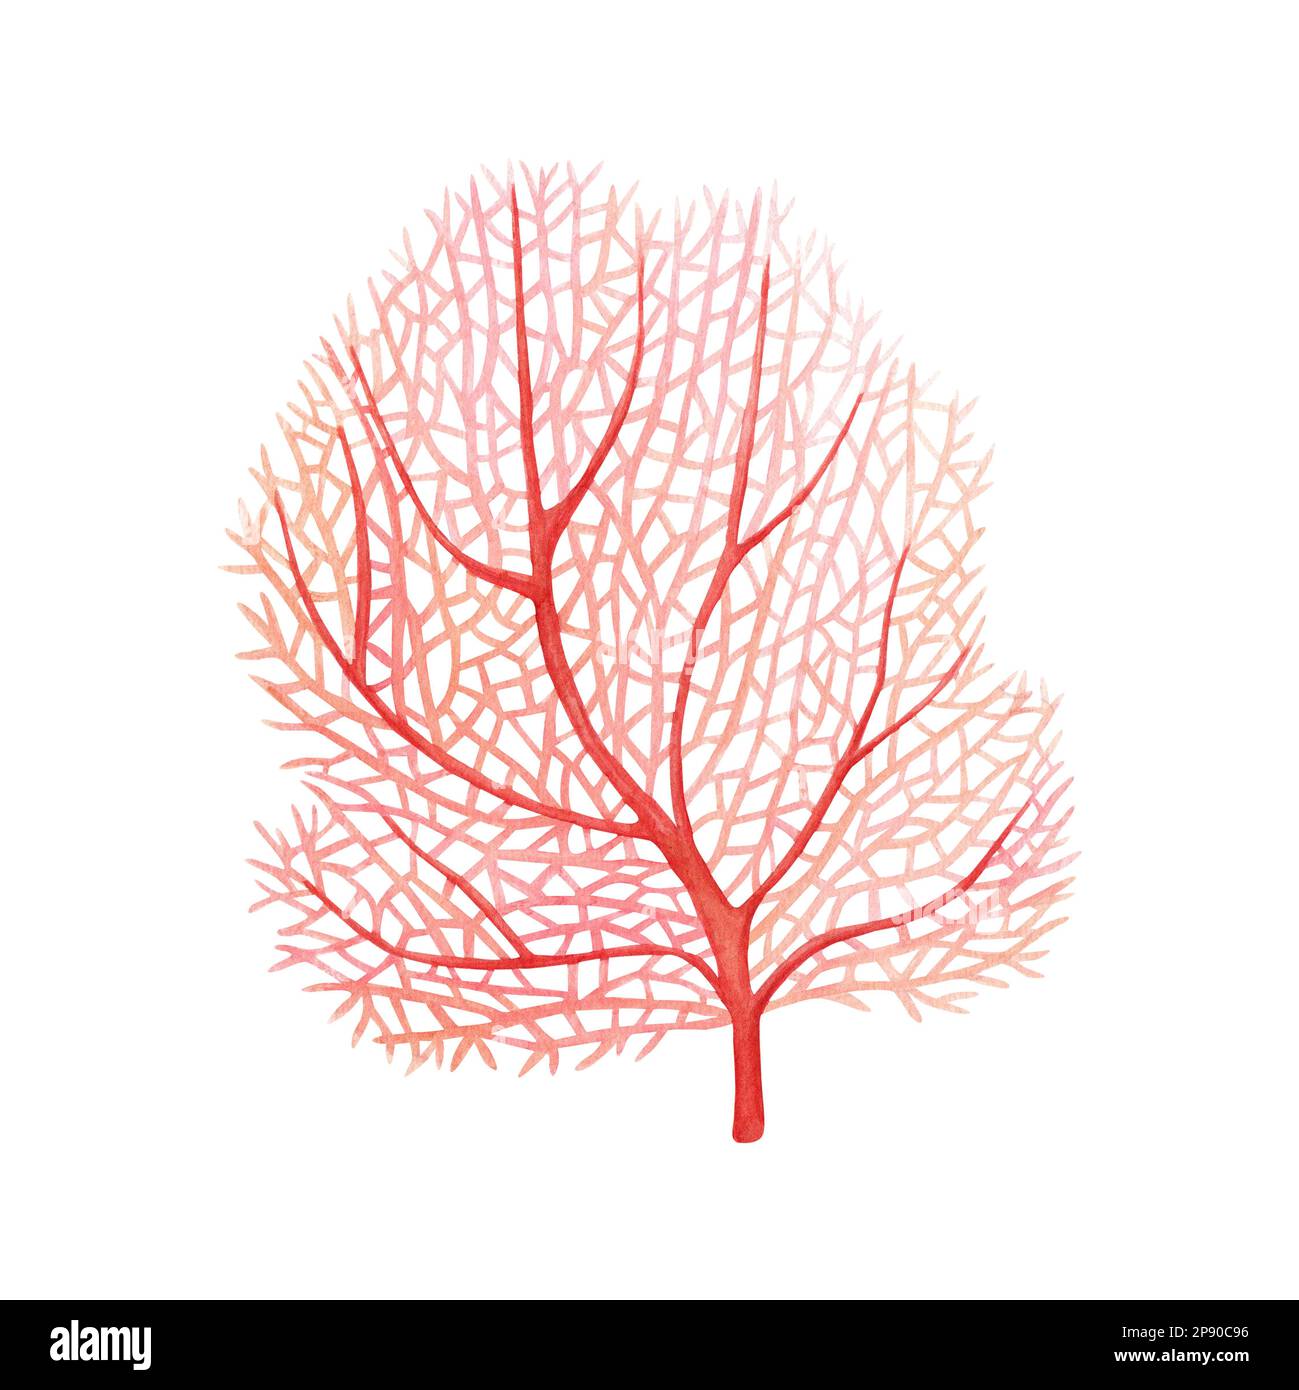 Red sea fan coral. Watercolor illustration isolated on white background Stock Photo